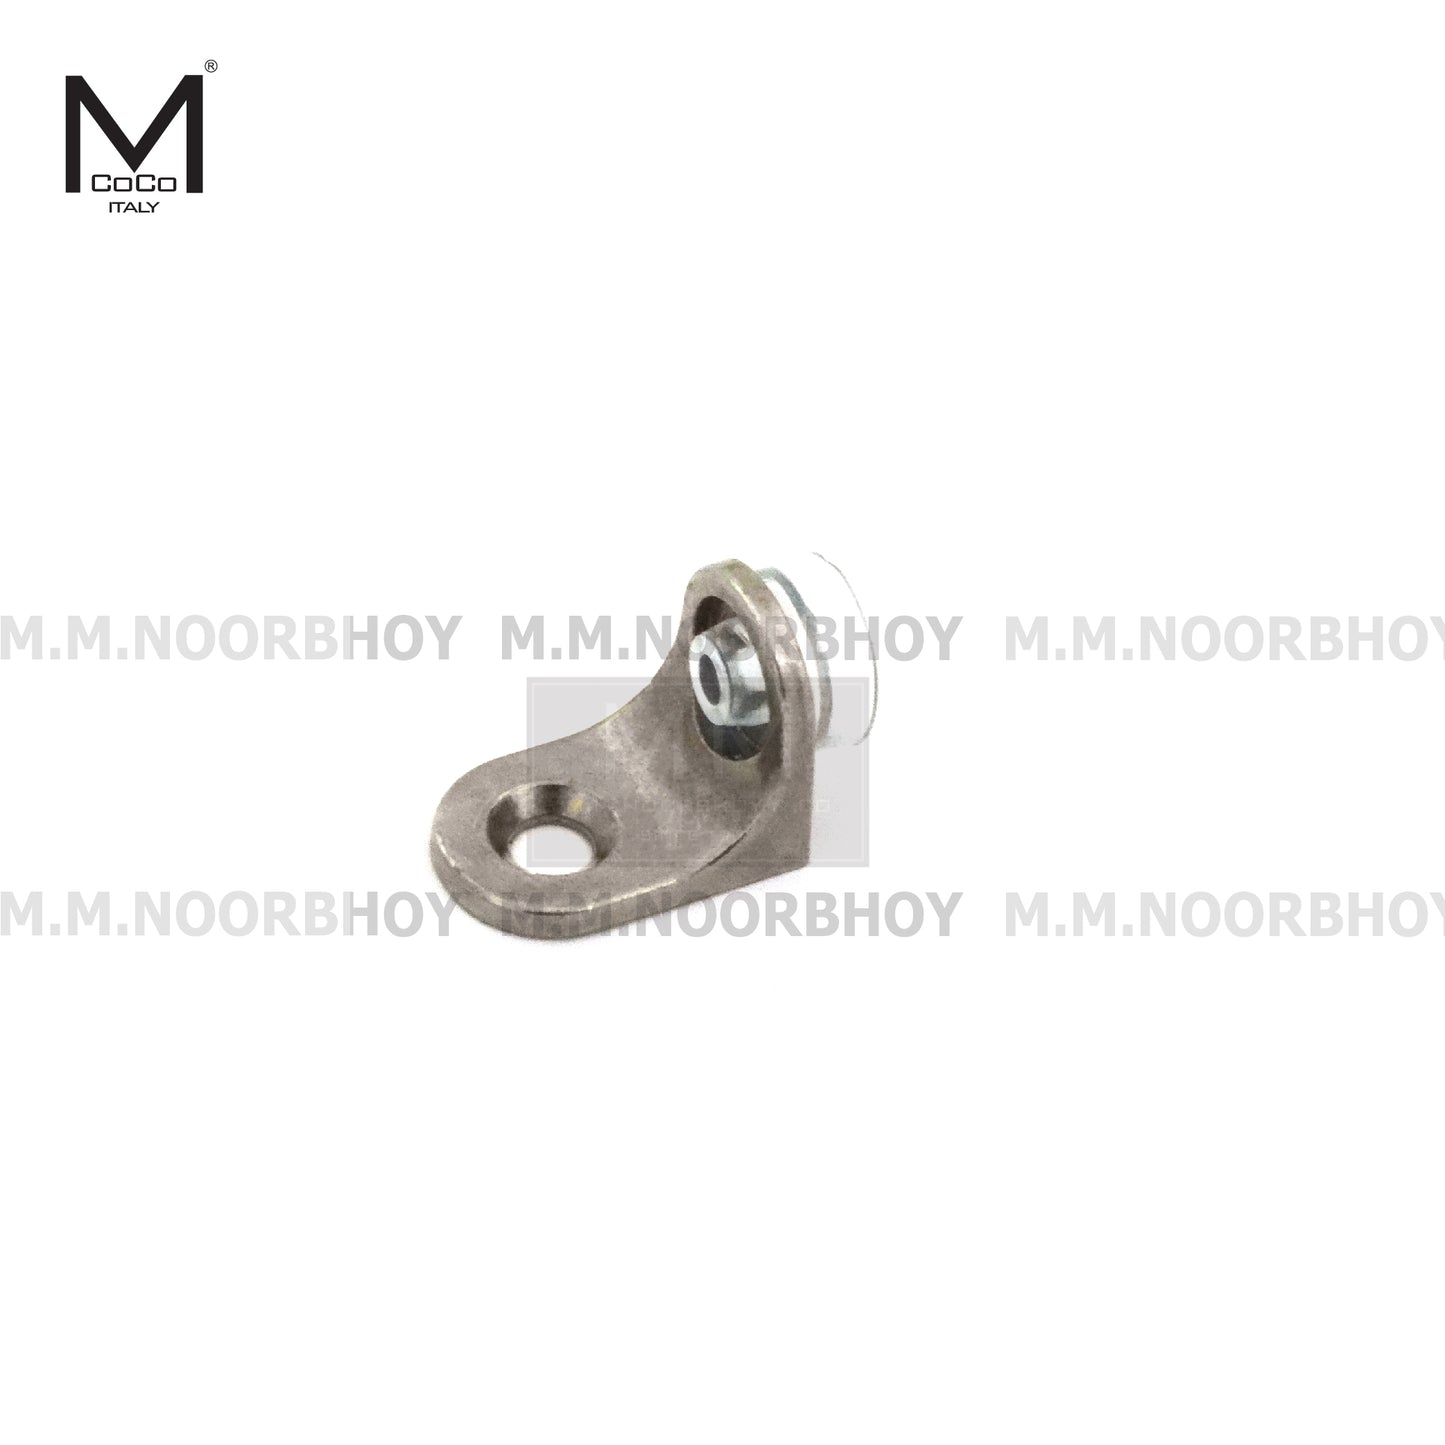 Mcoco Shelf Support Chrome Plated Finish  - GD641B